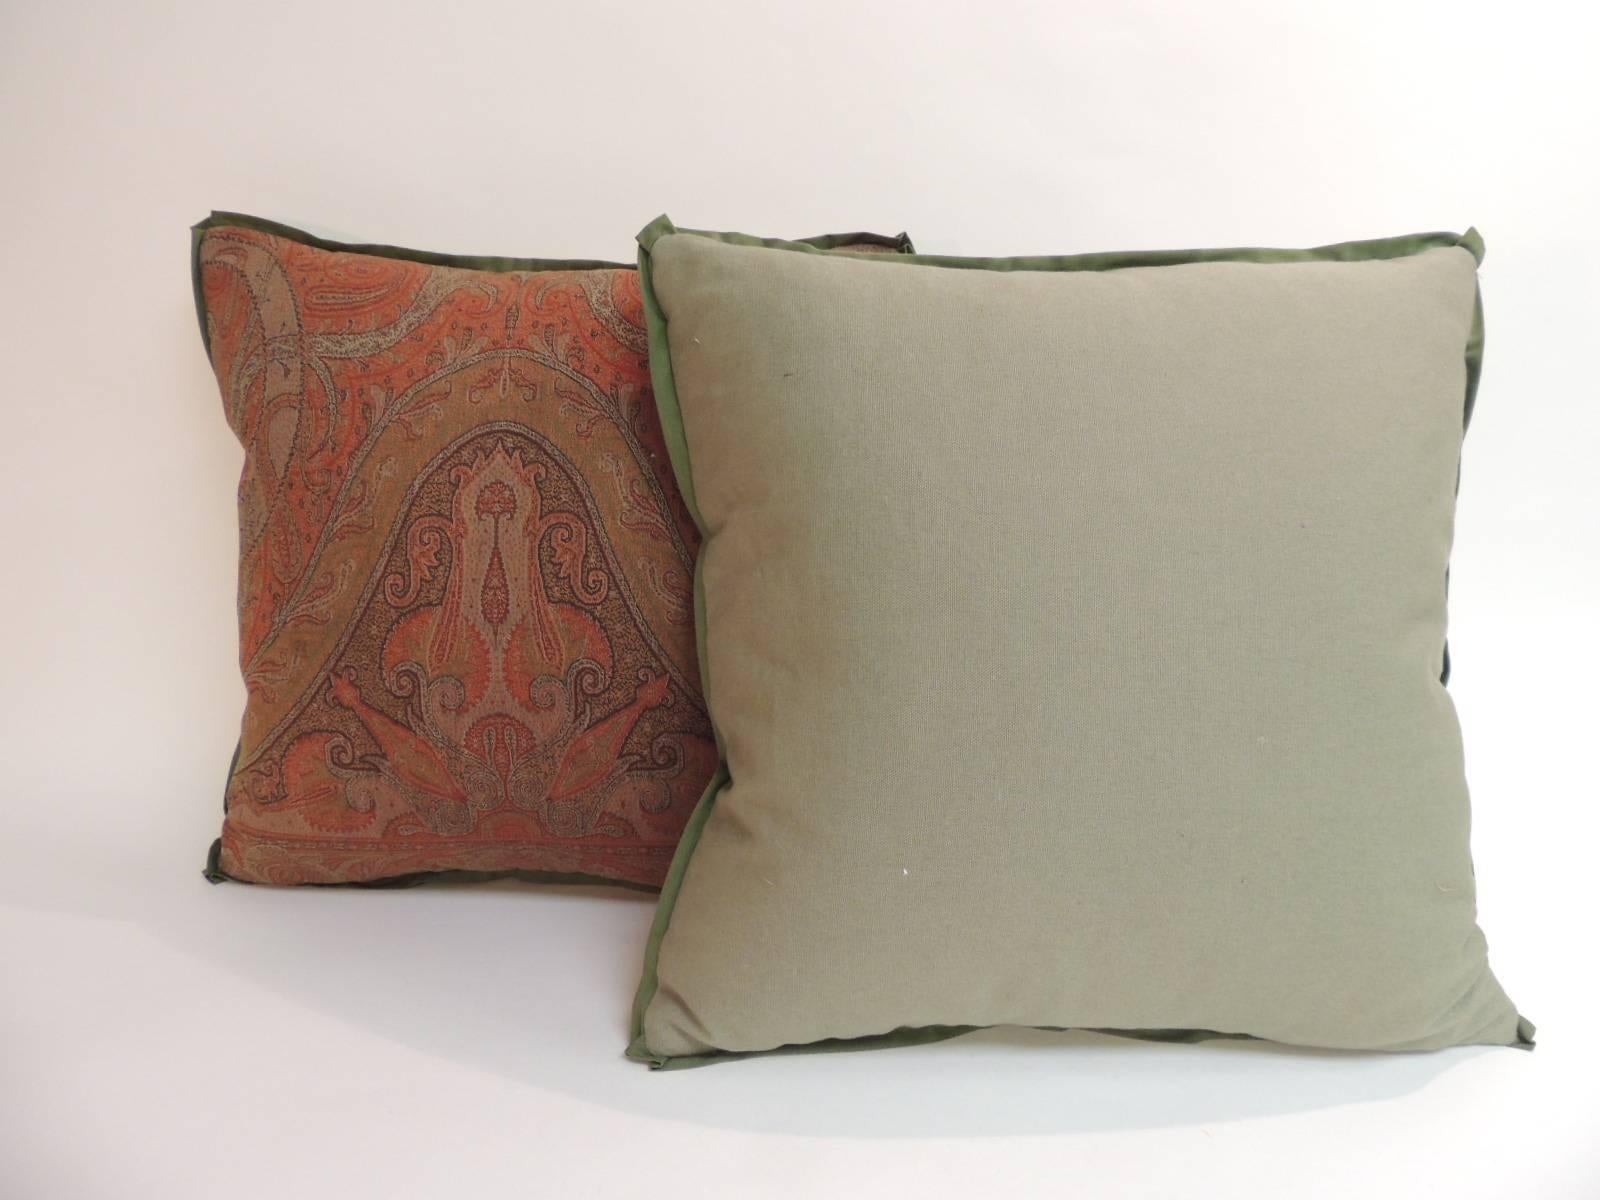 Hand-Crafted Pair of 19th Century Kashmir Woven Paisley Decorative Pillows